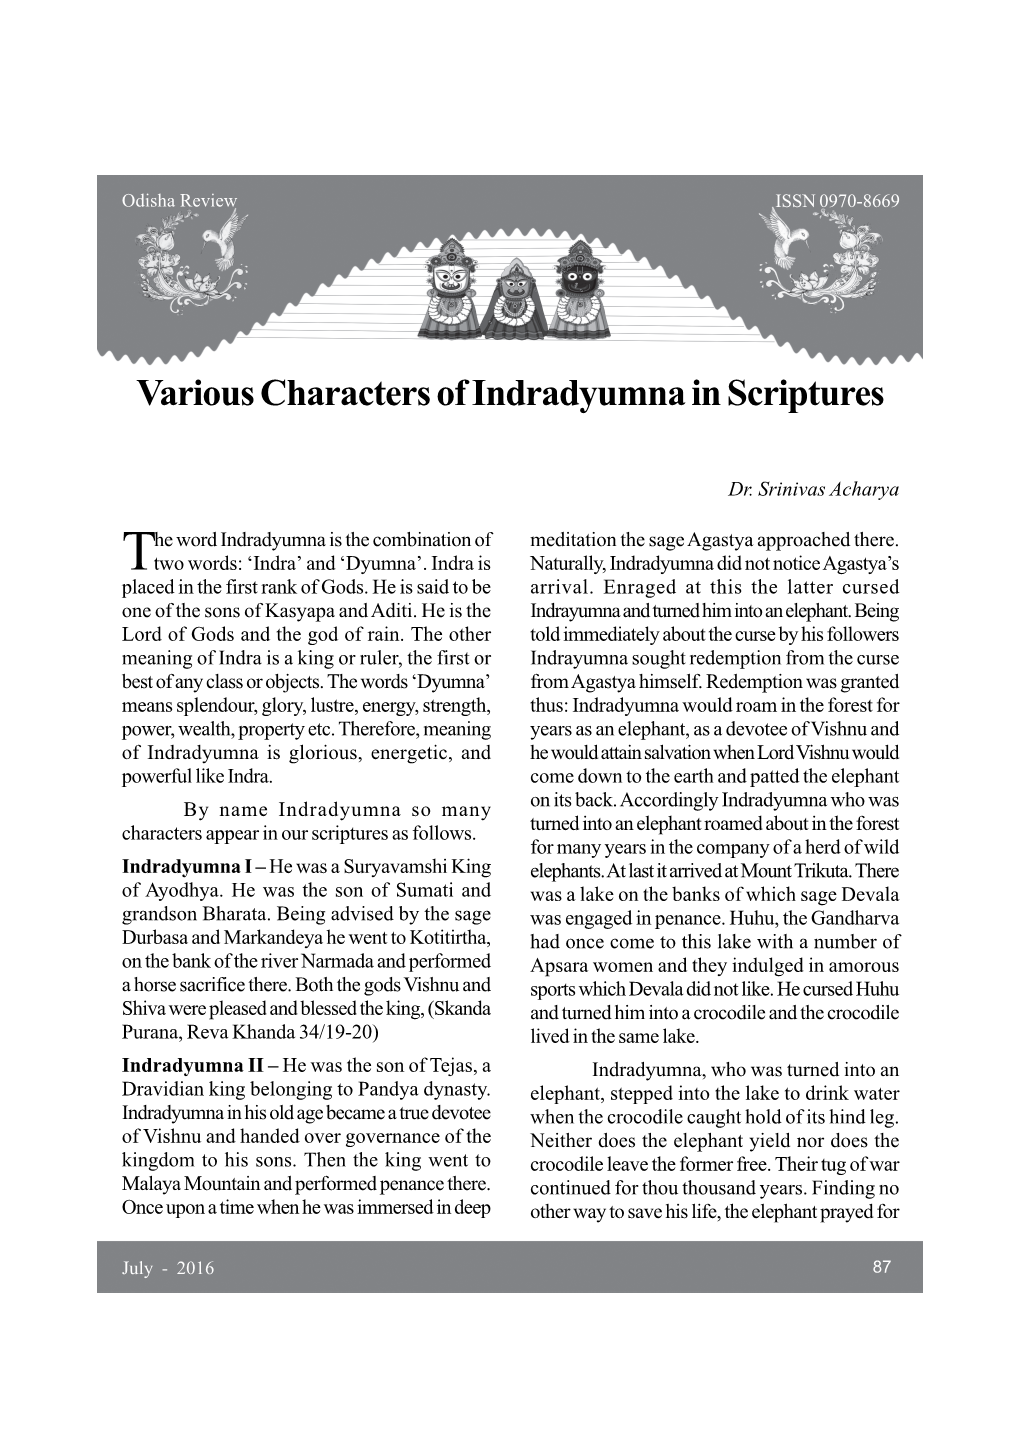 Various Characters of Indradyumna in Scriptures